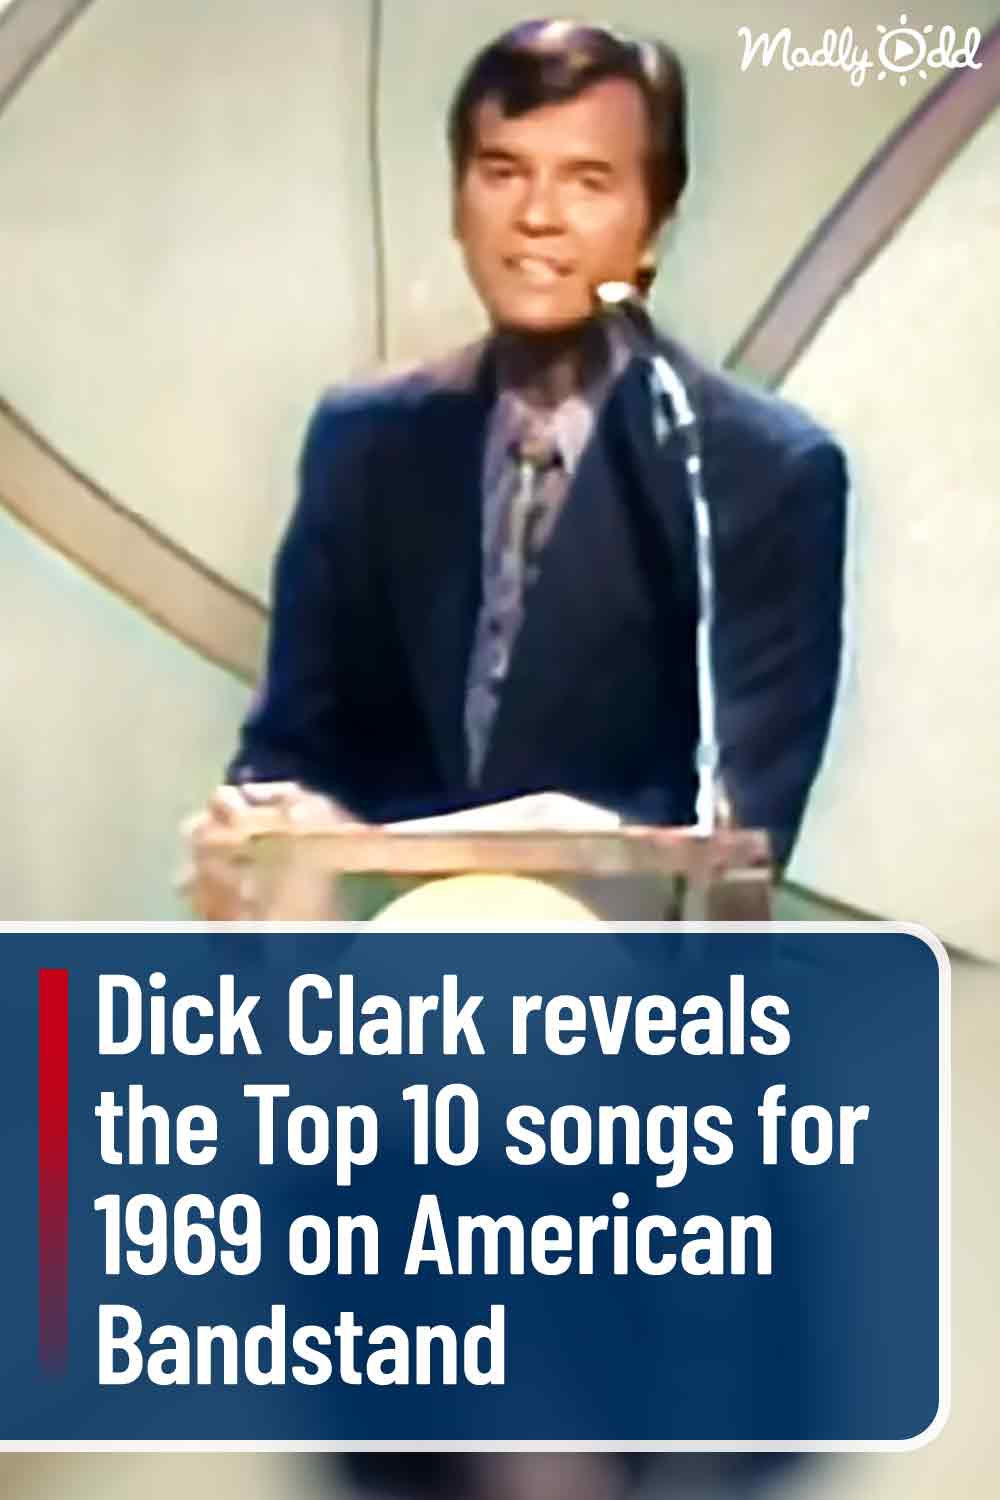 Dick Clark reveals the Top 10 songs for 1969 on American Bandstand